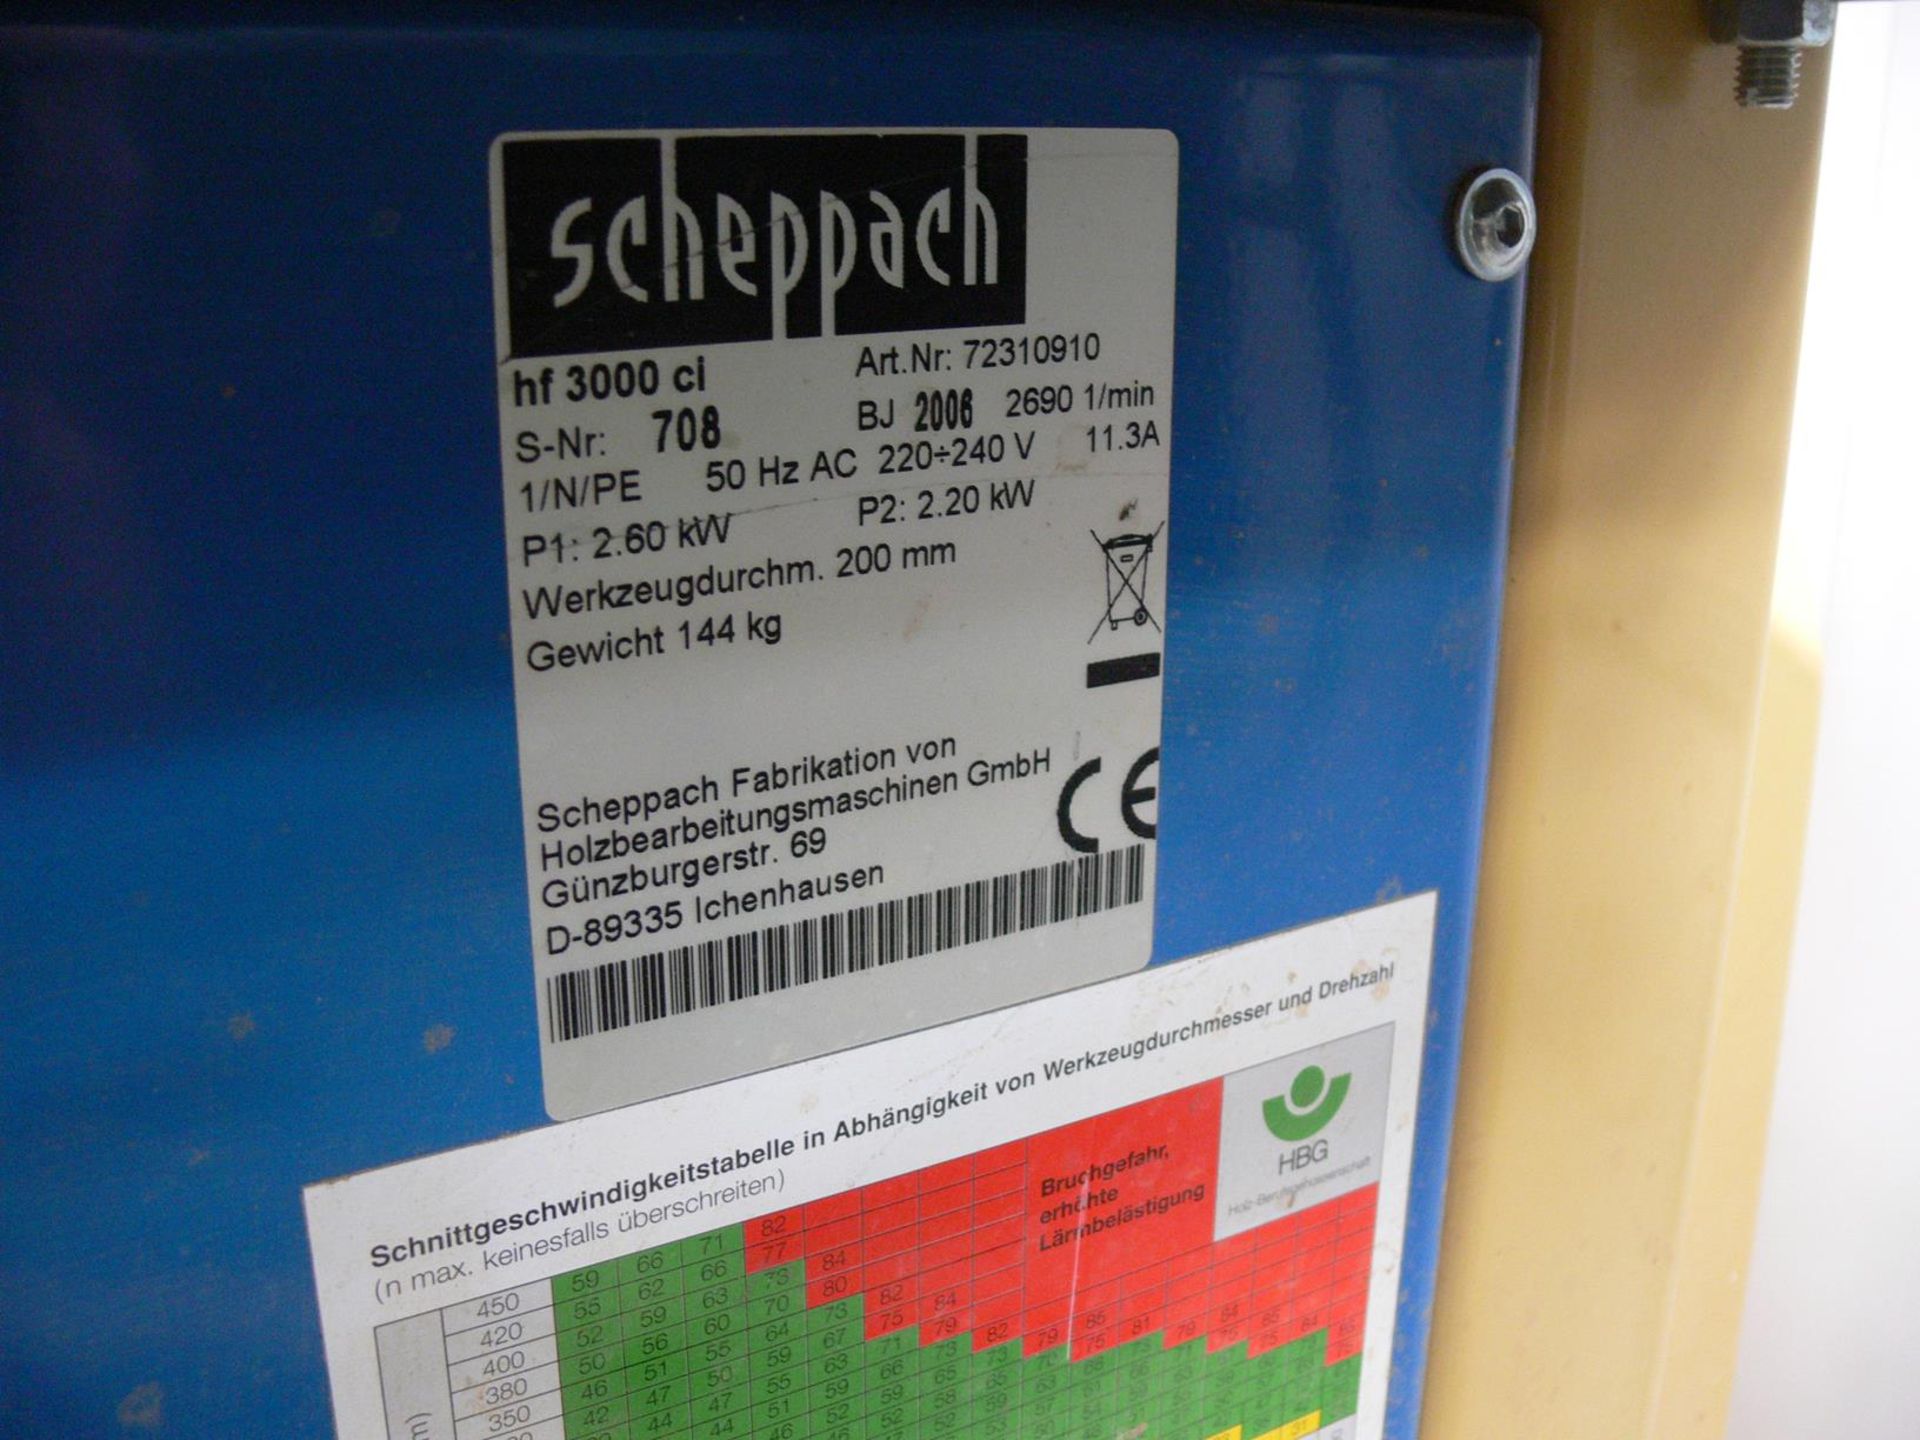 * Scheppach HF3000 Spindle, 240V, 1PH, S/N 708. Please note there is a £5 + VAT Lift Out Fee on this - Image 3 of 5